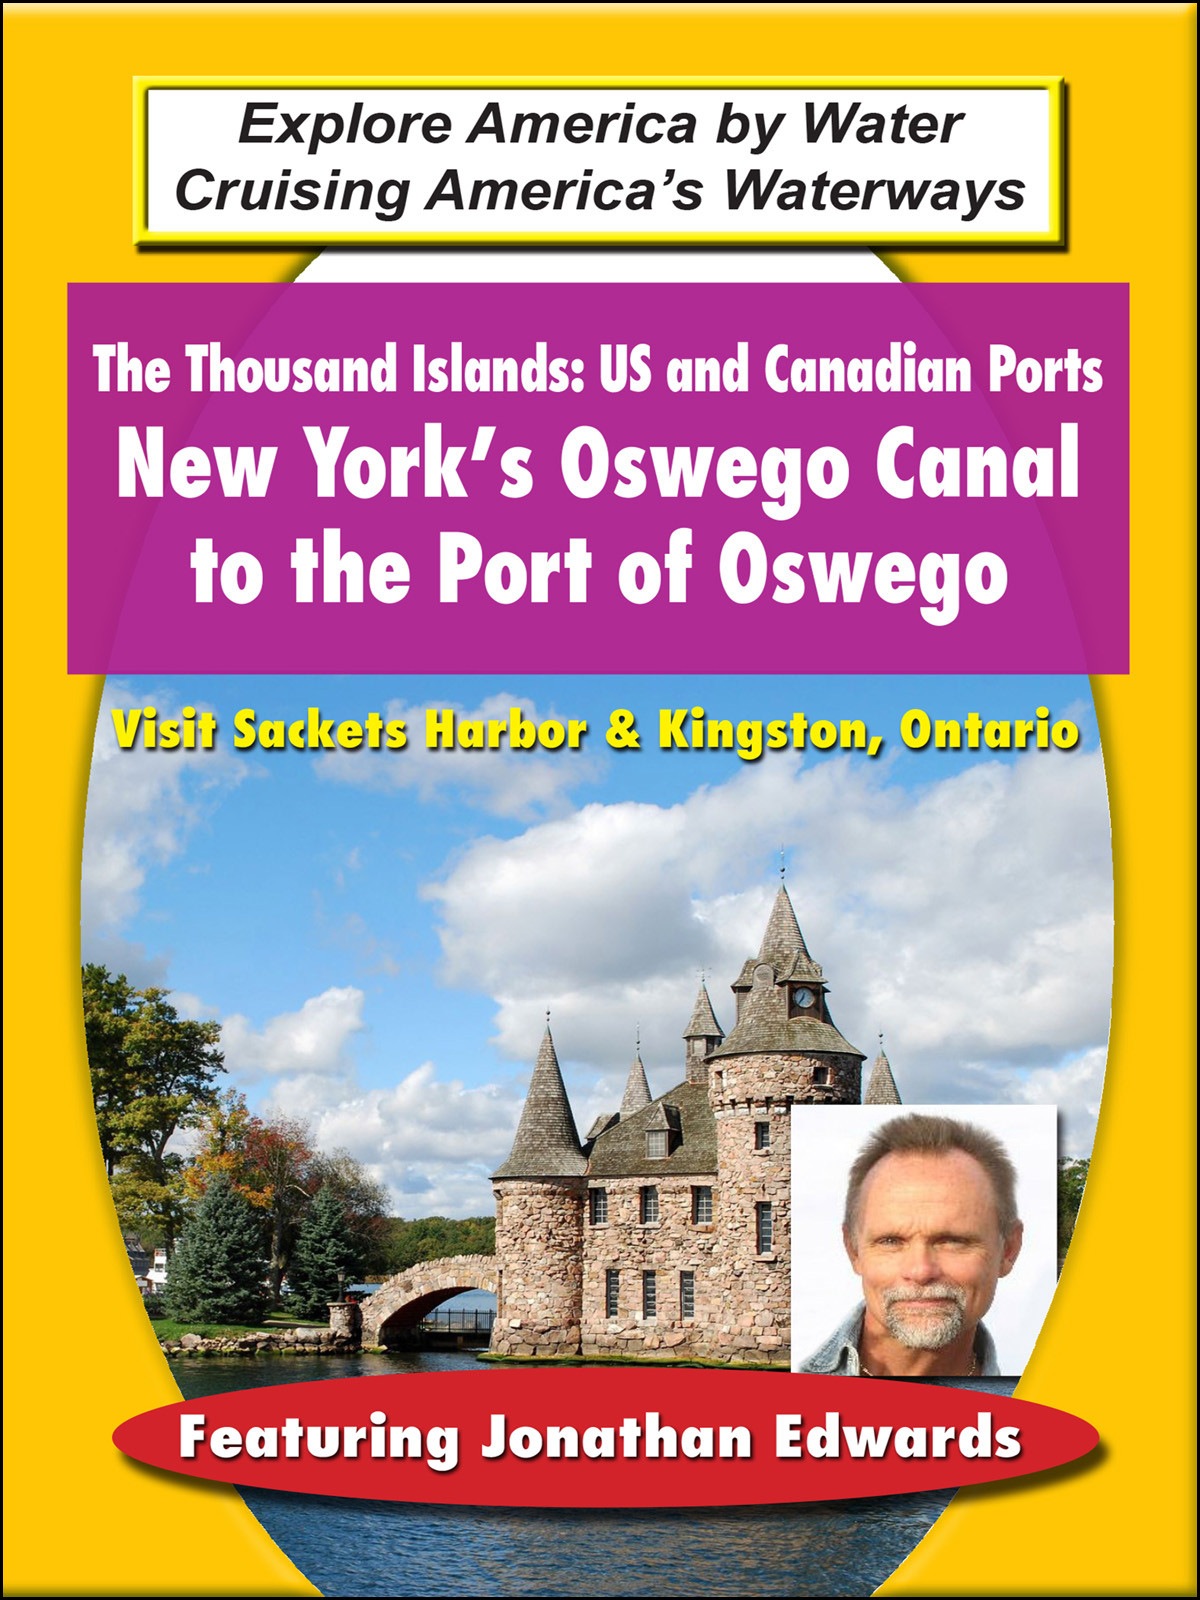 T8905 - The Thousand Islands US and Canadian Ports - New York's Oswego Canal to the Port of Oswego